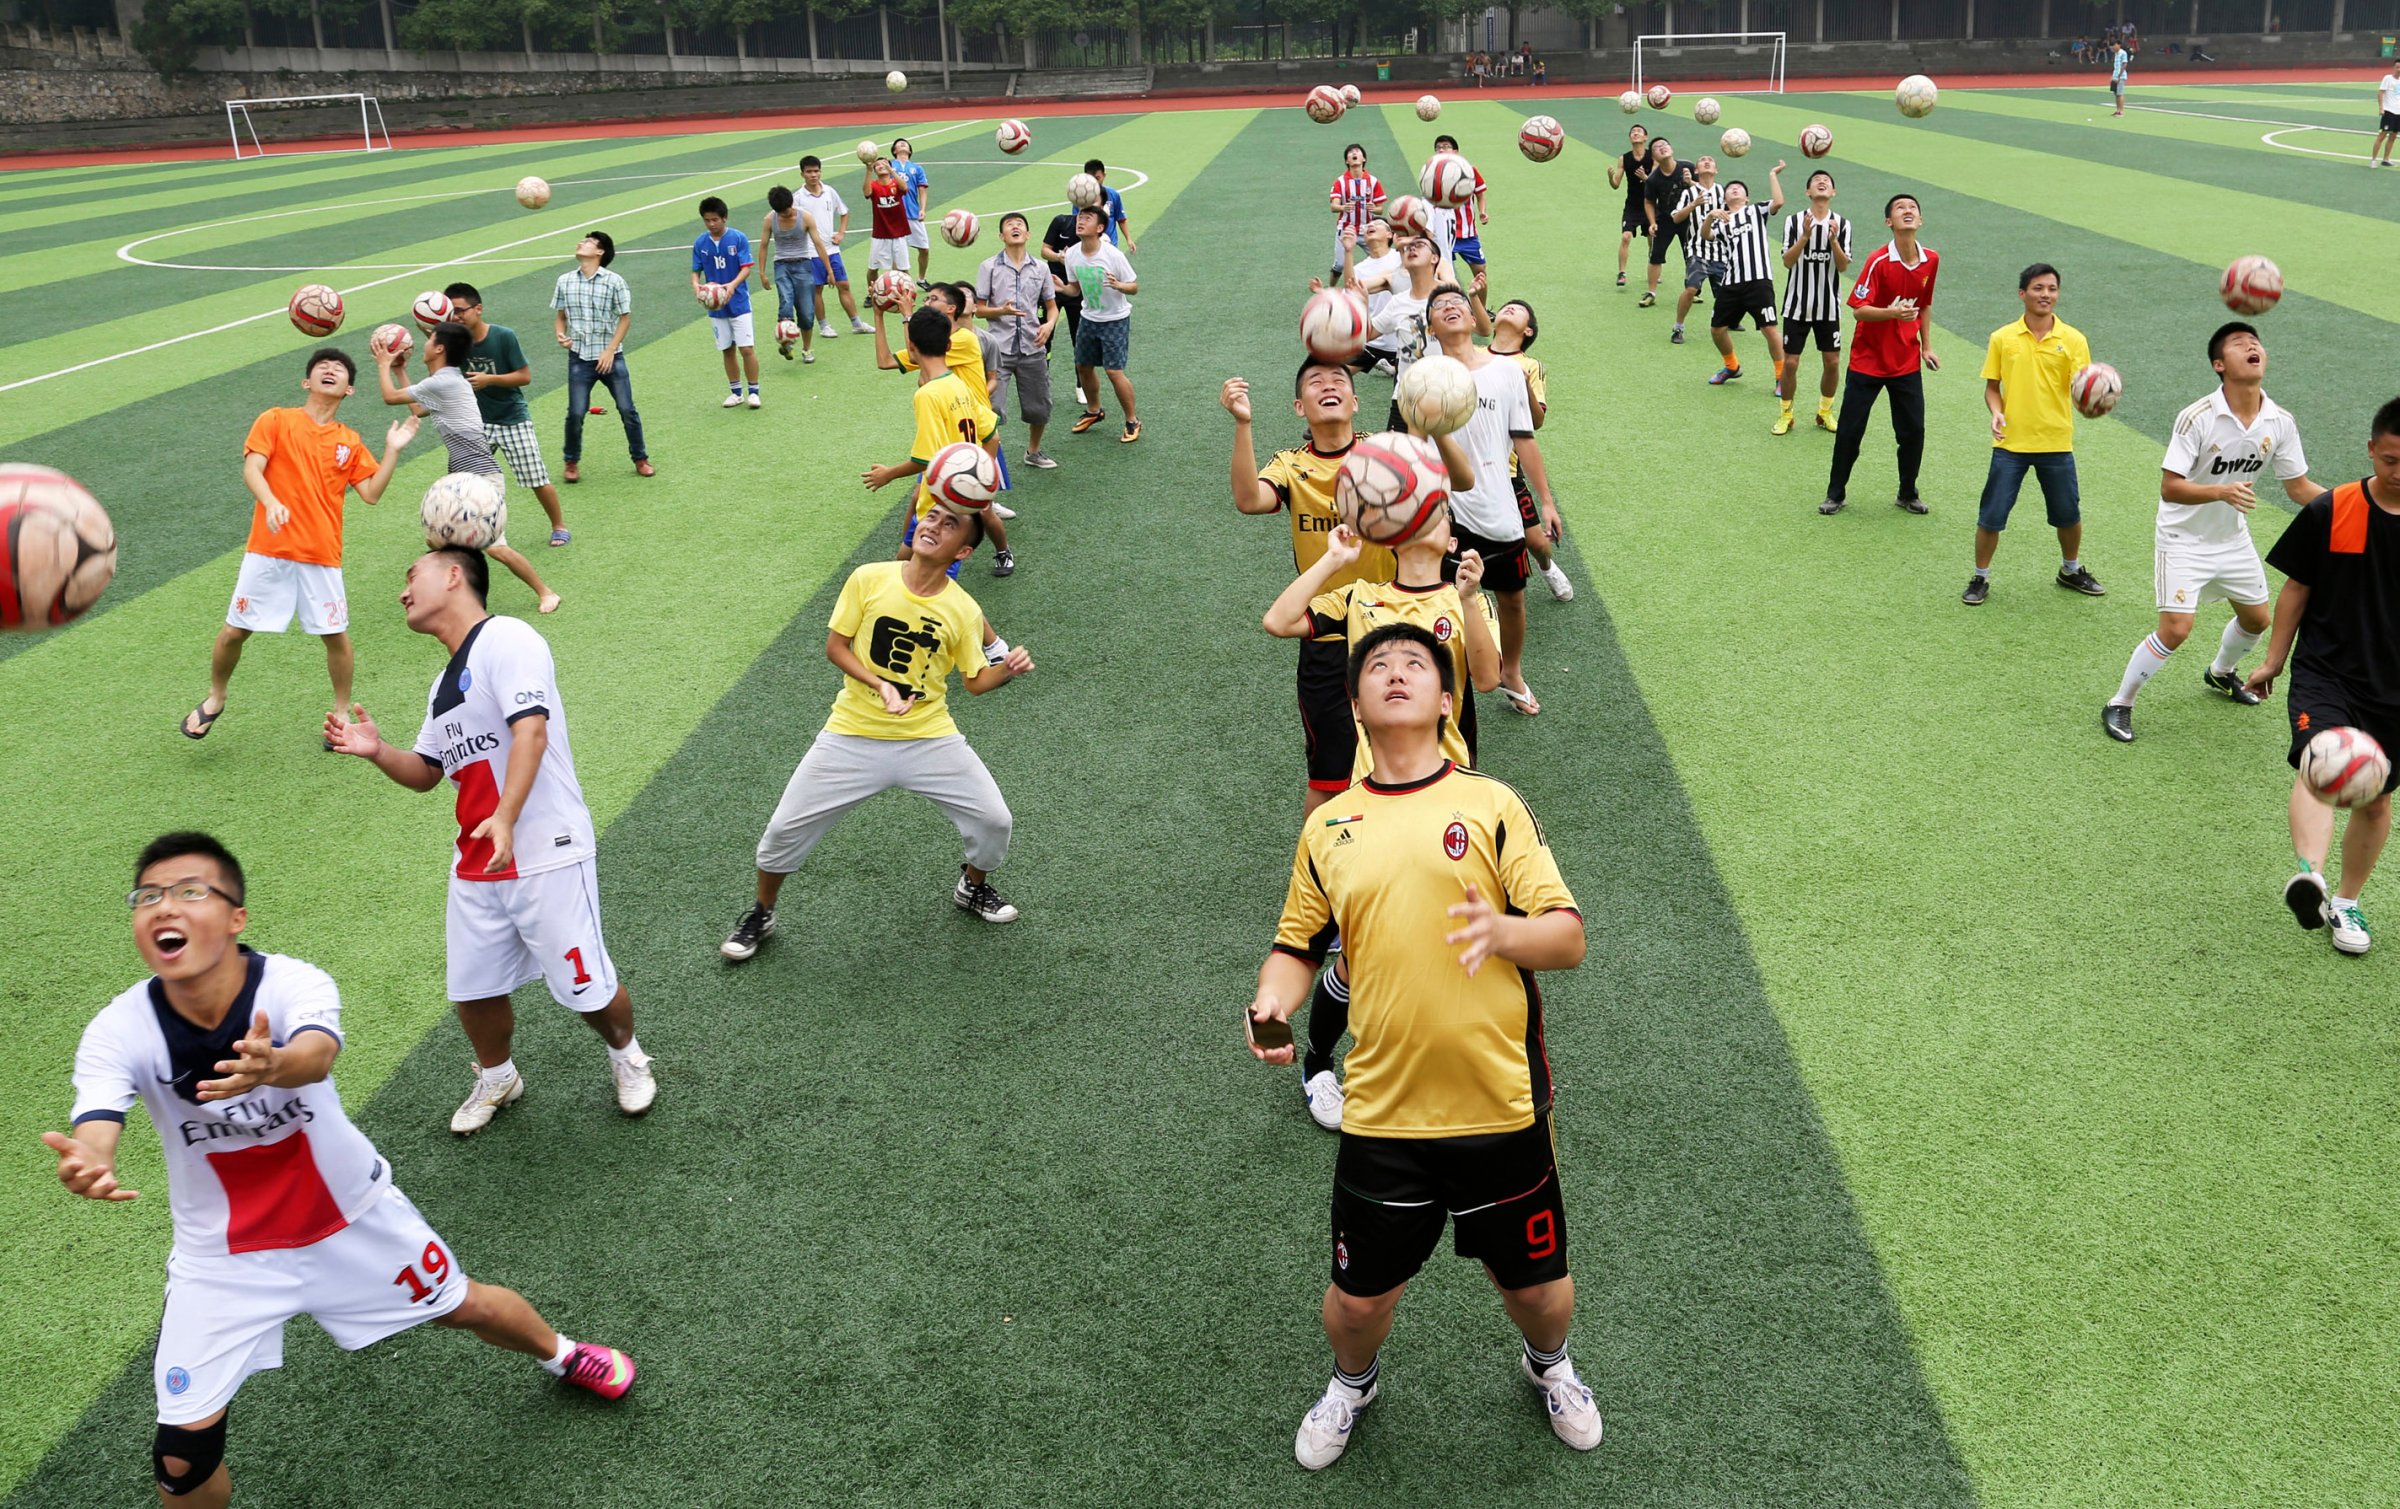 Students head soccer balls during a competition at the campus of University of South China in Hengyang, Hunan province